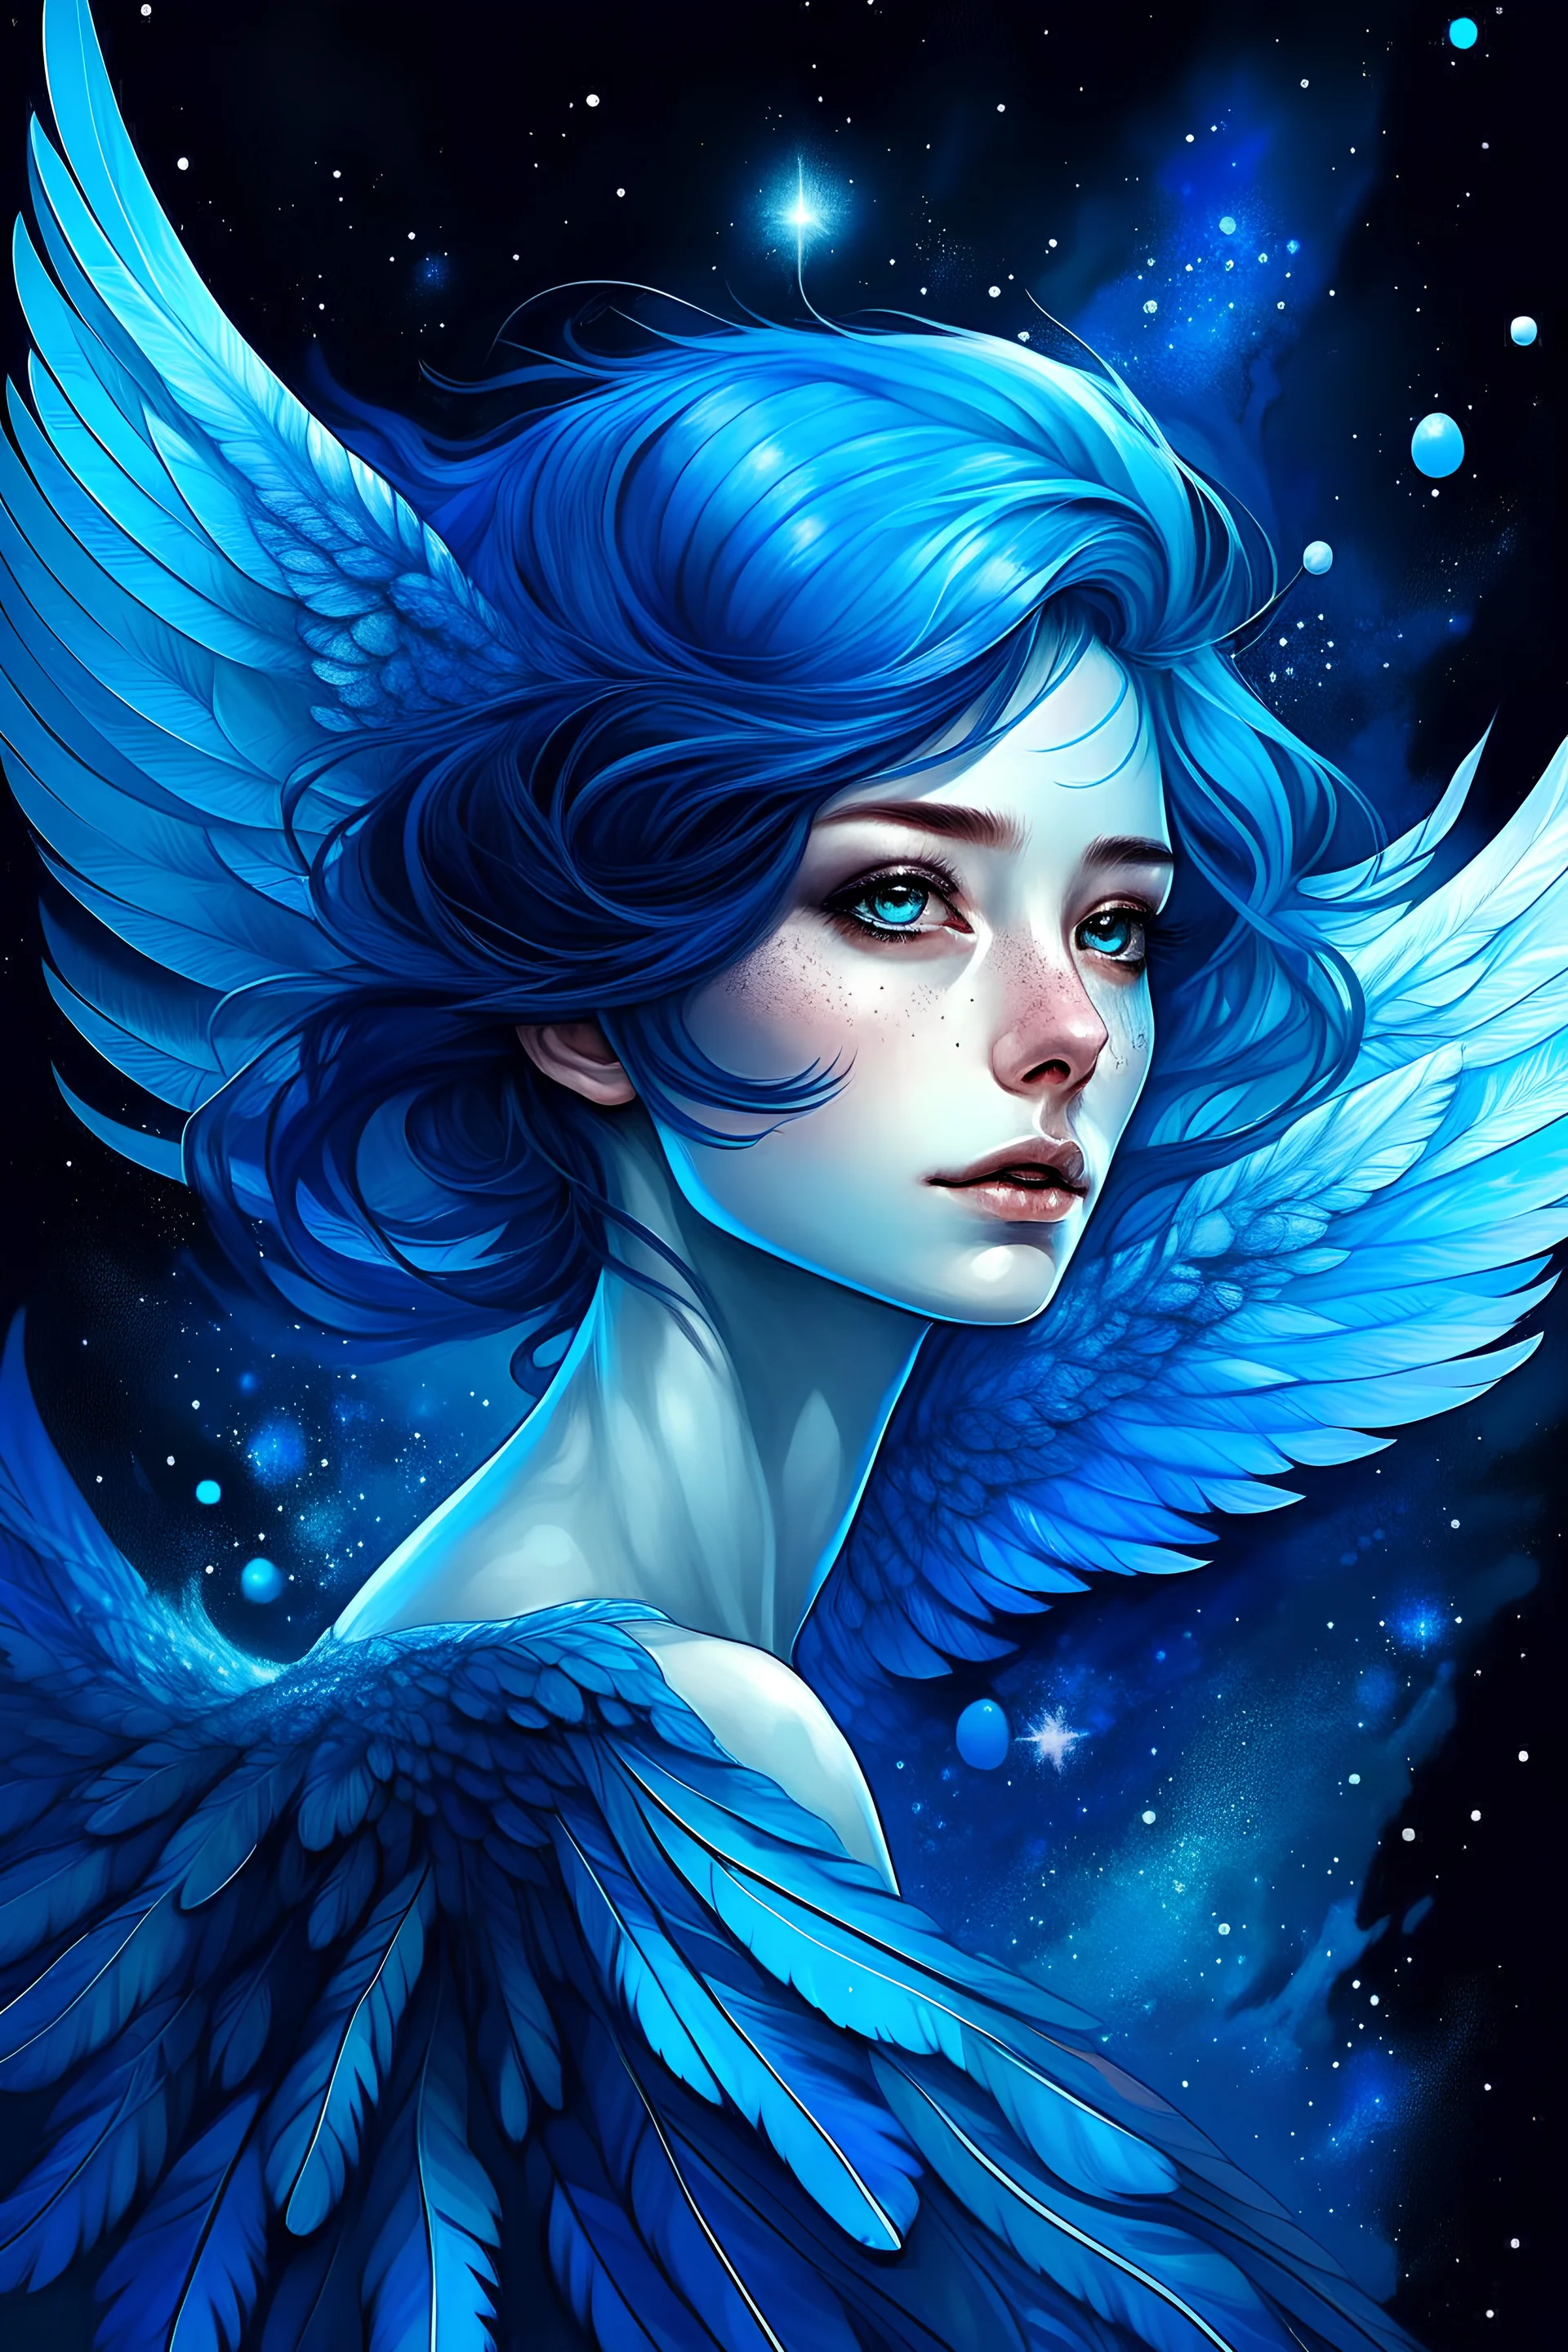 woman with blue wings in space, in the style of the stars art group (xing xing), detailed character illustrations, victorian-inspired illustrations, iridescence/opalescence, detailed facial features, luminous color palette, commission for